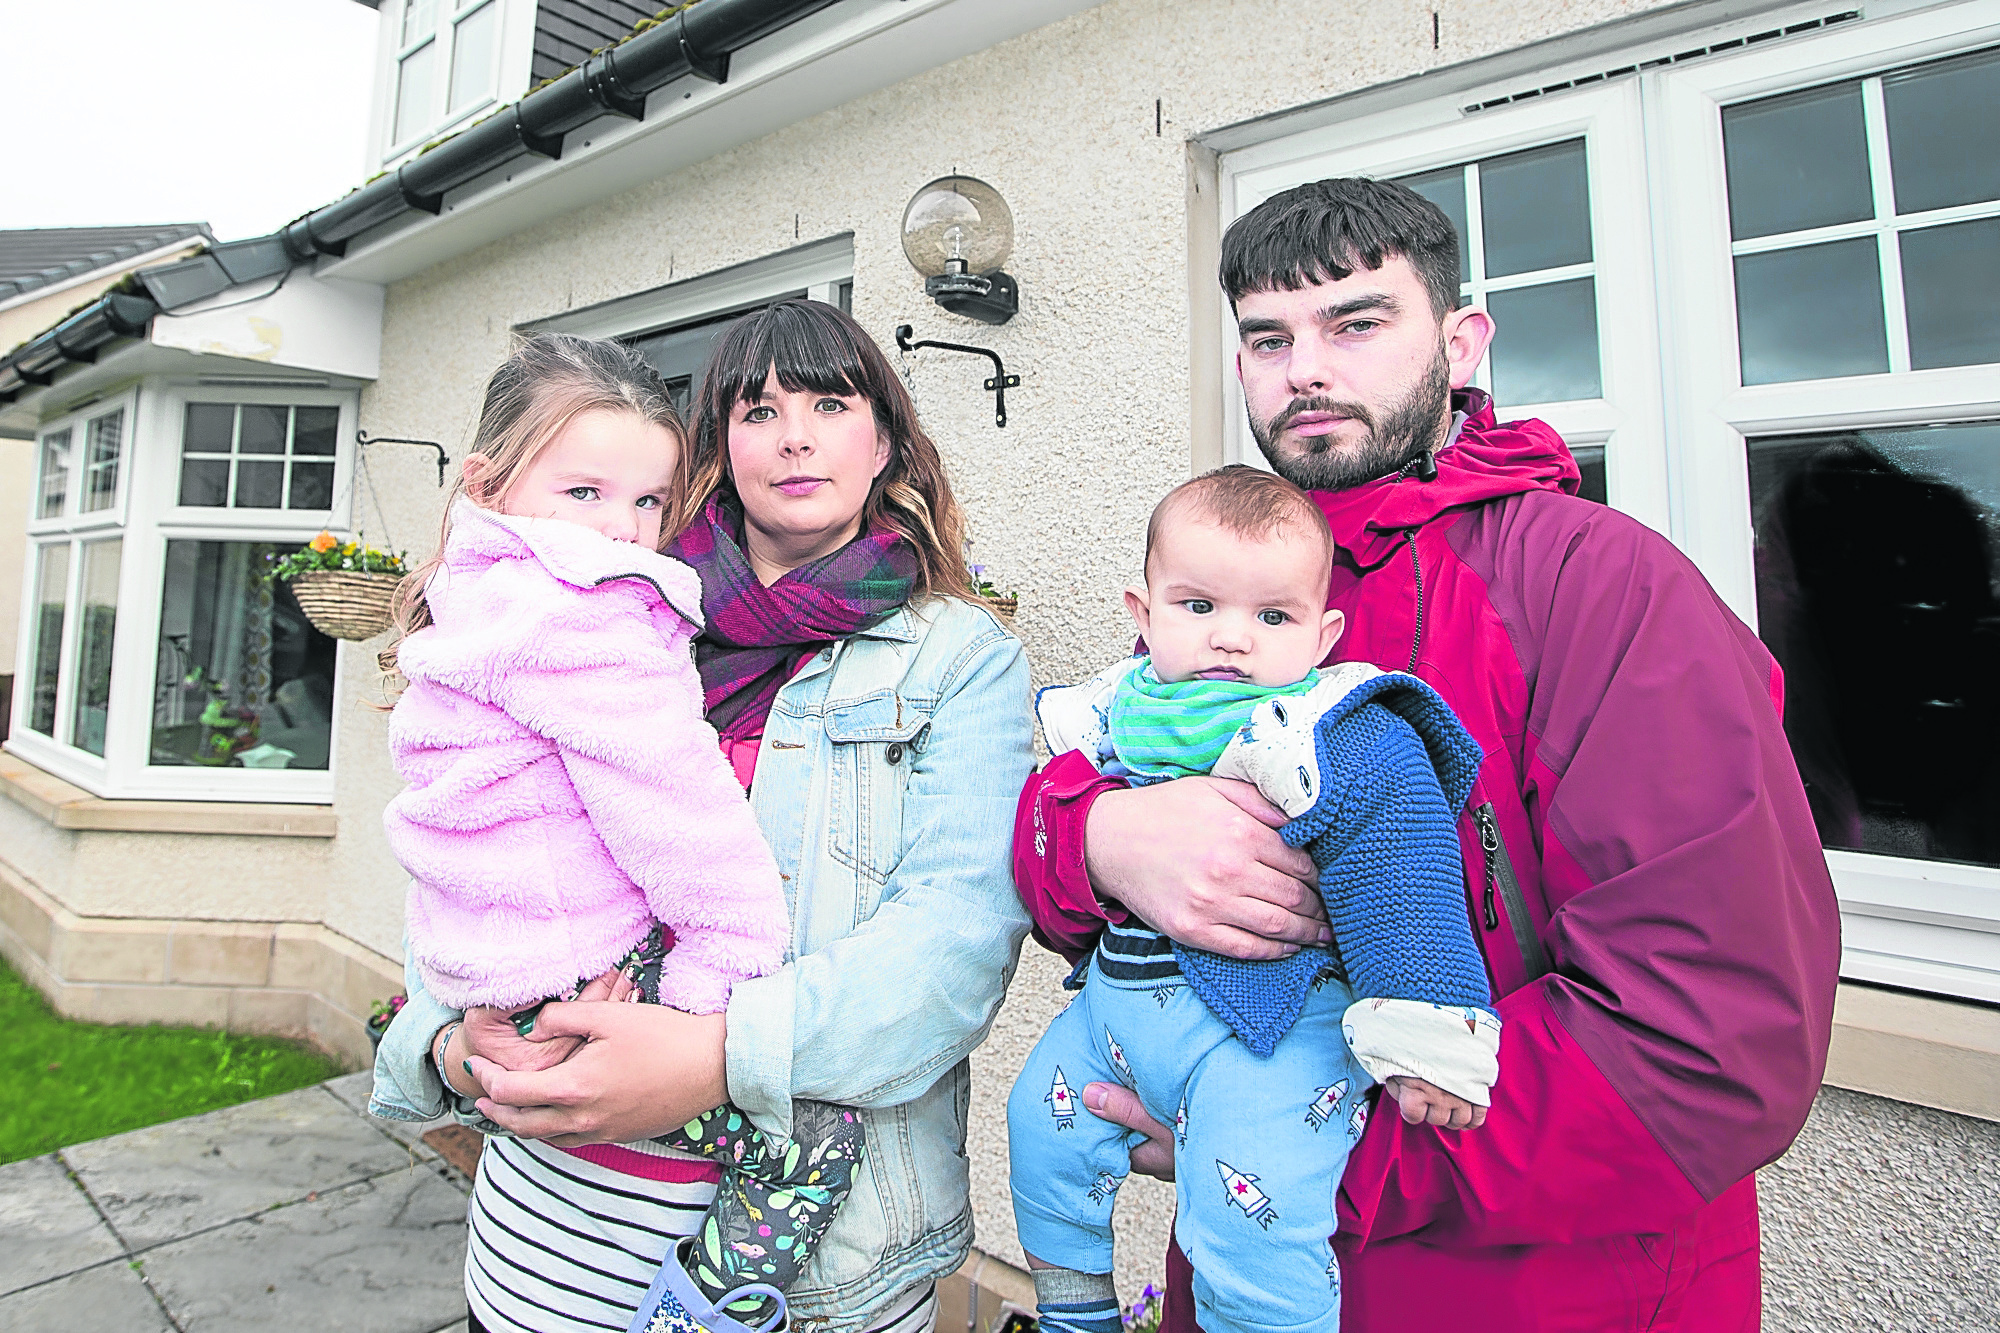 Rachel Chalmers and Daniel McLean with their children three-year-old Merrin and five-month-old Innes.